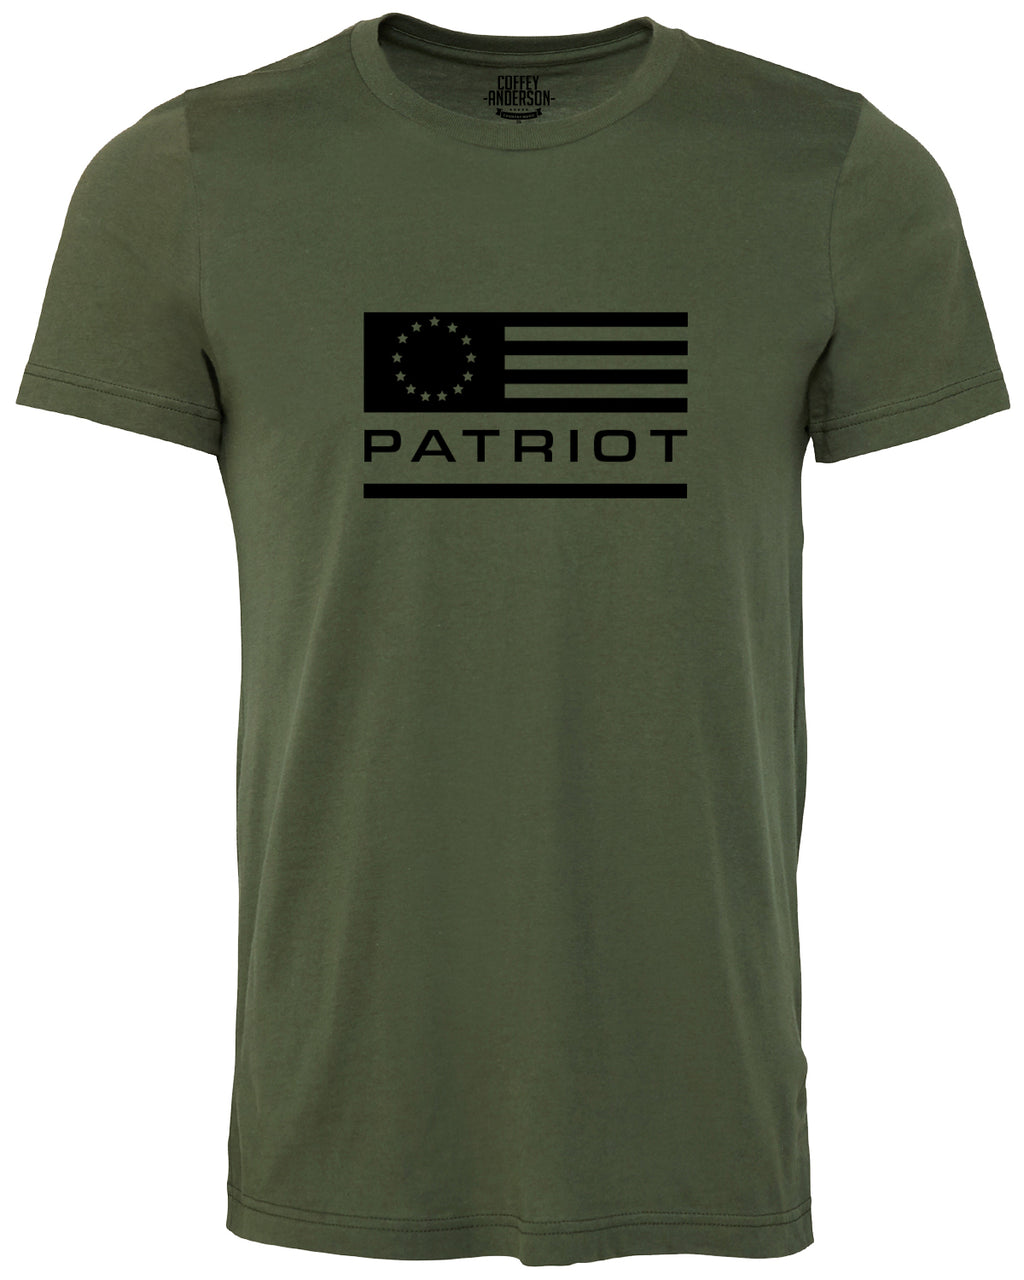 Patriot Betsy Ross Flag Tee - Army Green